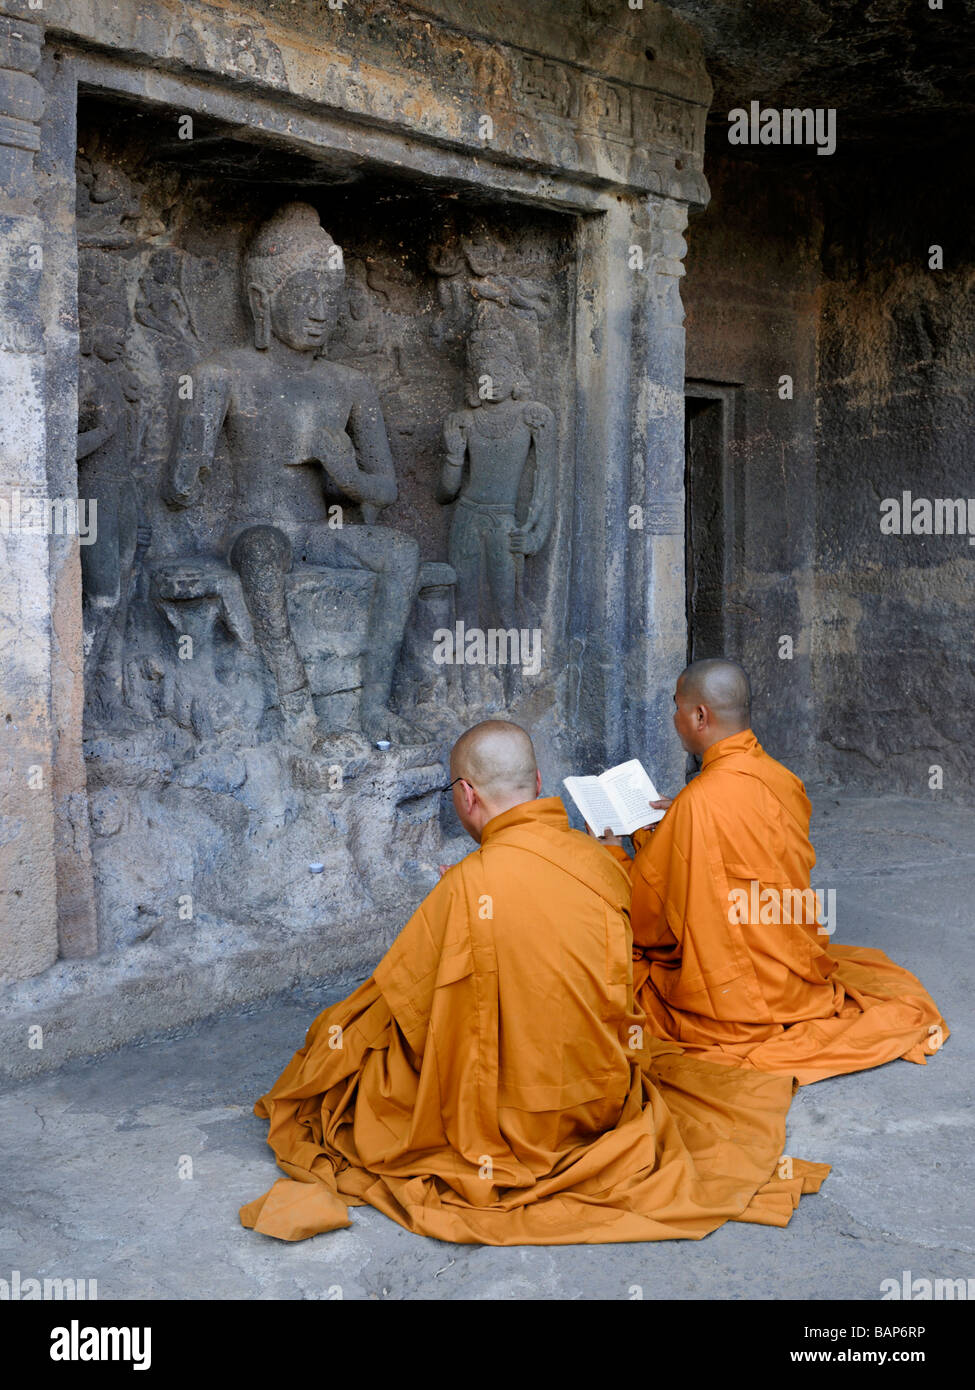 Buddhist Monks in orange robes seated in front of Rock Cut Buddha Frescoe praying at Ajanta Caves Stock Photo